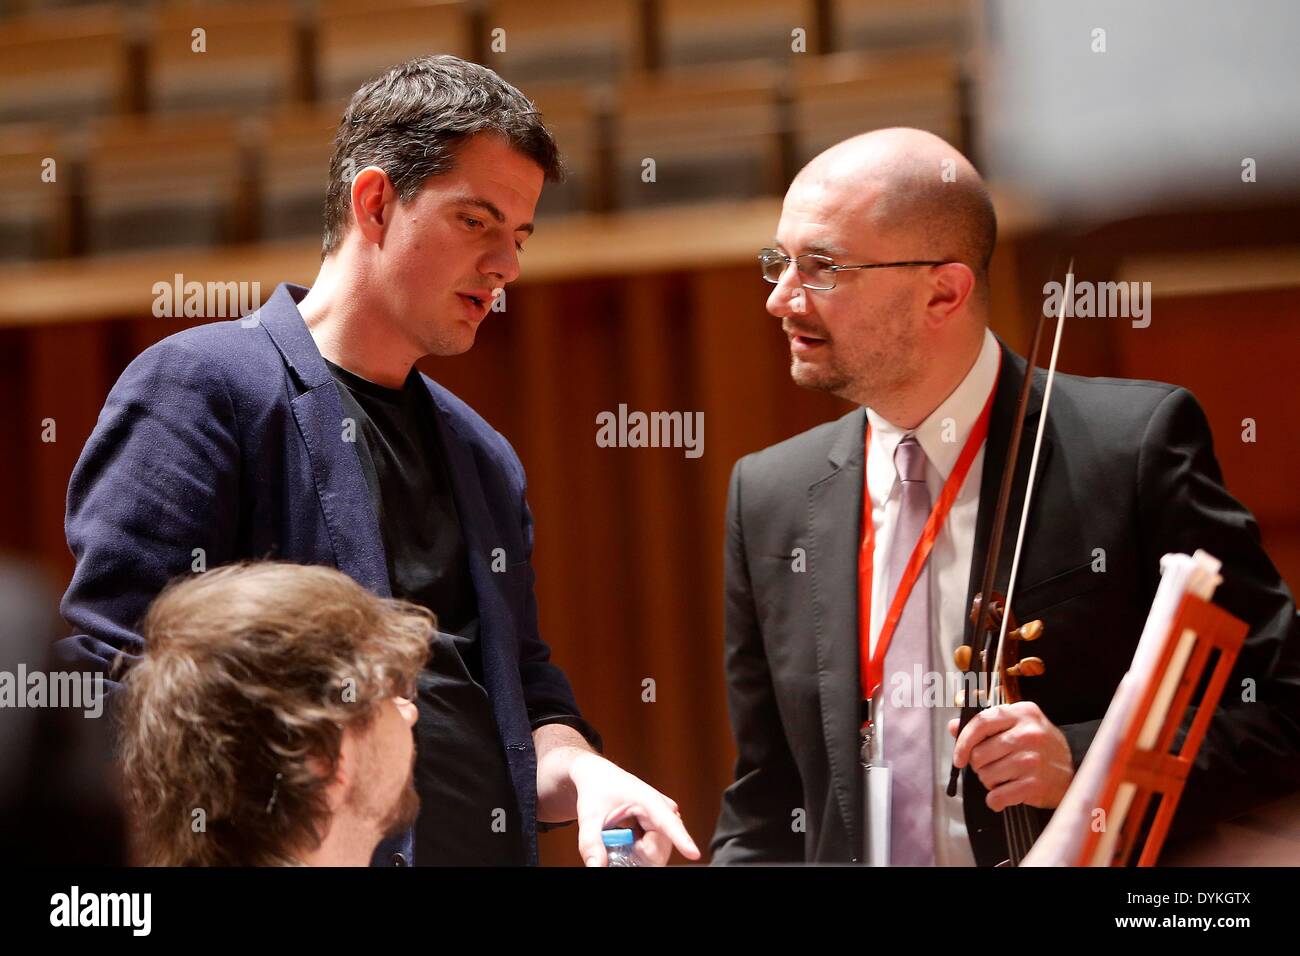 Beijing, China. 21st Apr, 2014. Philippe Jaroussky (L), French countertenor singer, talks with band members at the National Grand Theater in Beijing, capital of China, April 21, 2014. The 'Philippe Jaroussky and Venice Baroque Orchestra Concert' held on Monday was Philippe's debut in China. A countertenor is a type of classical male singing voice whose vocal range is equivalent to that of the female soprano, mezzo-soprano voice types. © Zhang Yuwei/Xinhua/Alamy Live News Stock Photo